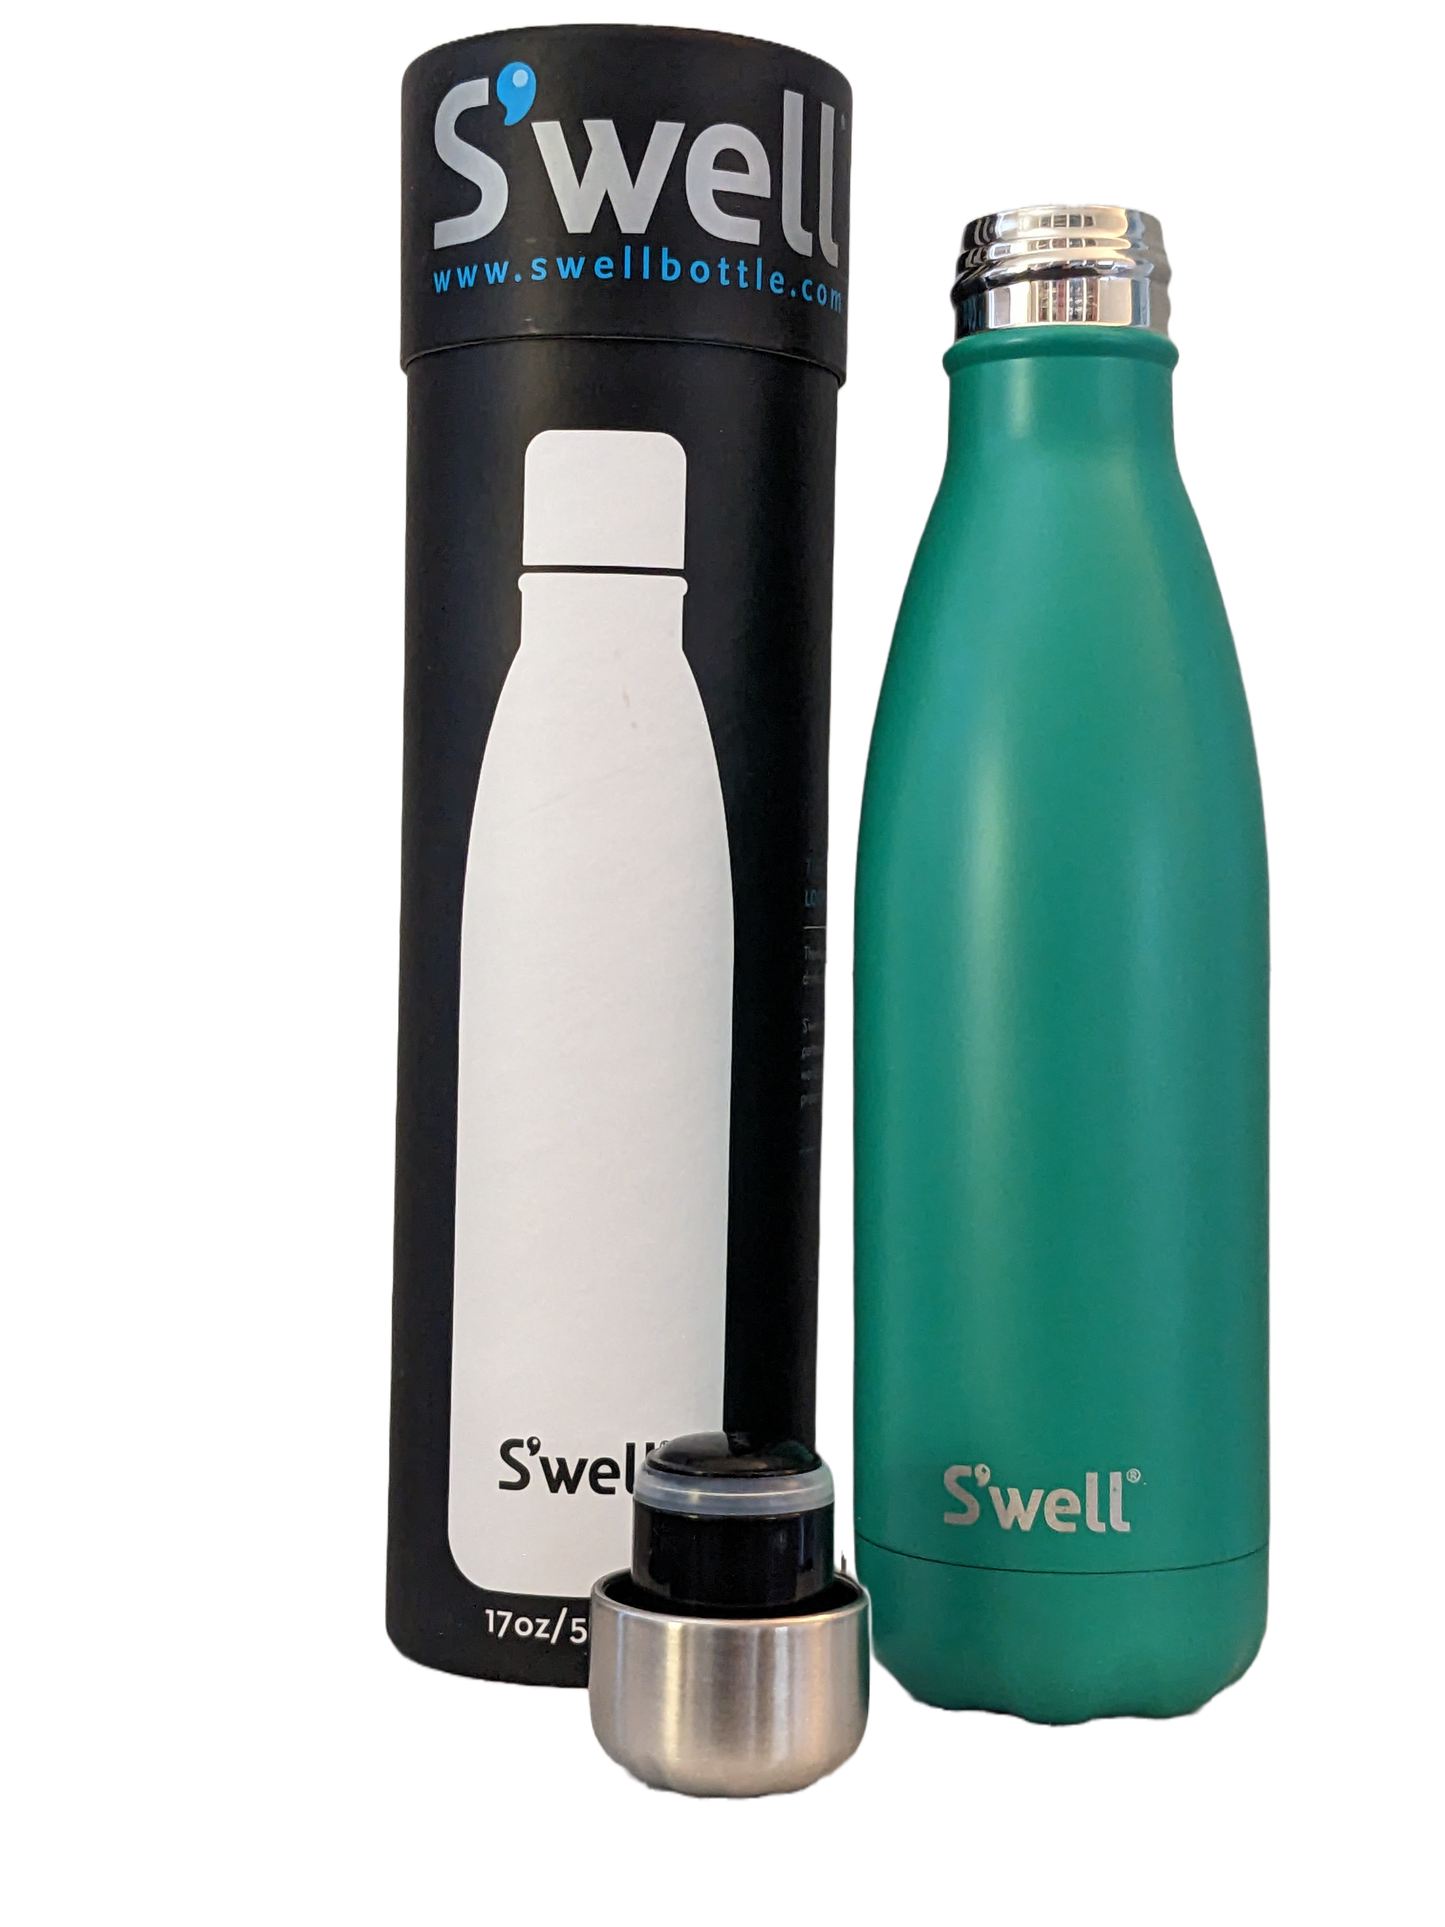 S'well Stainless Steel Eucalyptus Triple-Layered Vacuum-Insulated Containers Keeps Drinks Cold for 41 Hours and Hot for 18-with No Condensation-BPA Free Water Bottle, 17 Fl Oz